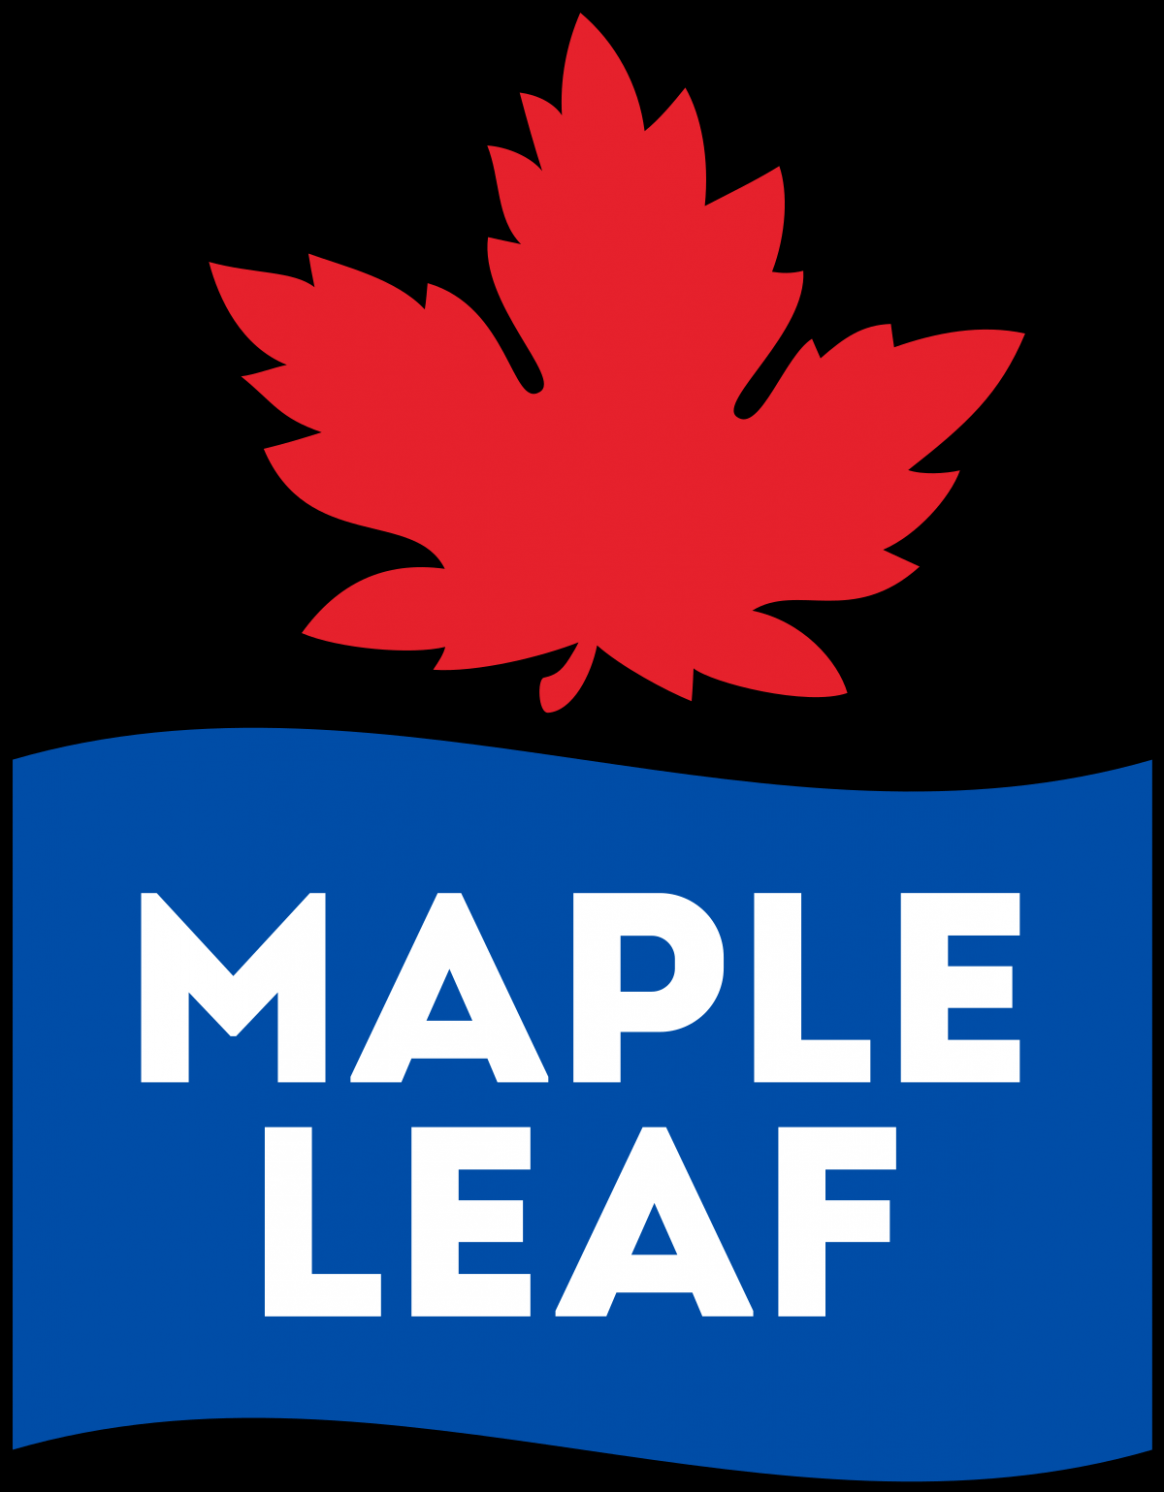 Red Maple Leaf Company Logo - Simple Guidance For You In Animated Chelsea